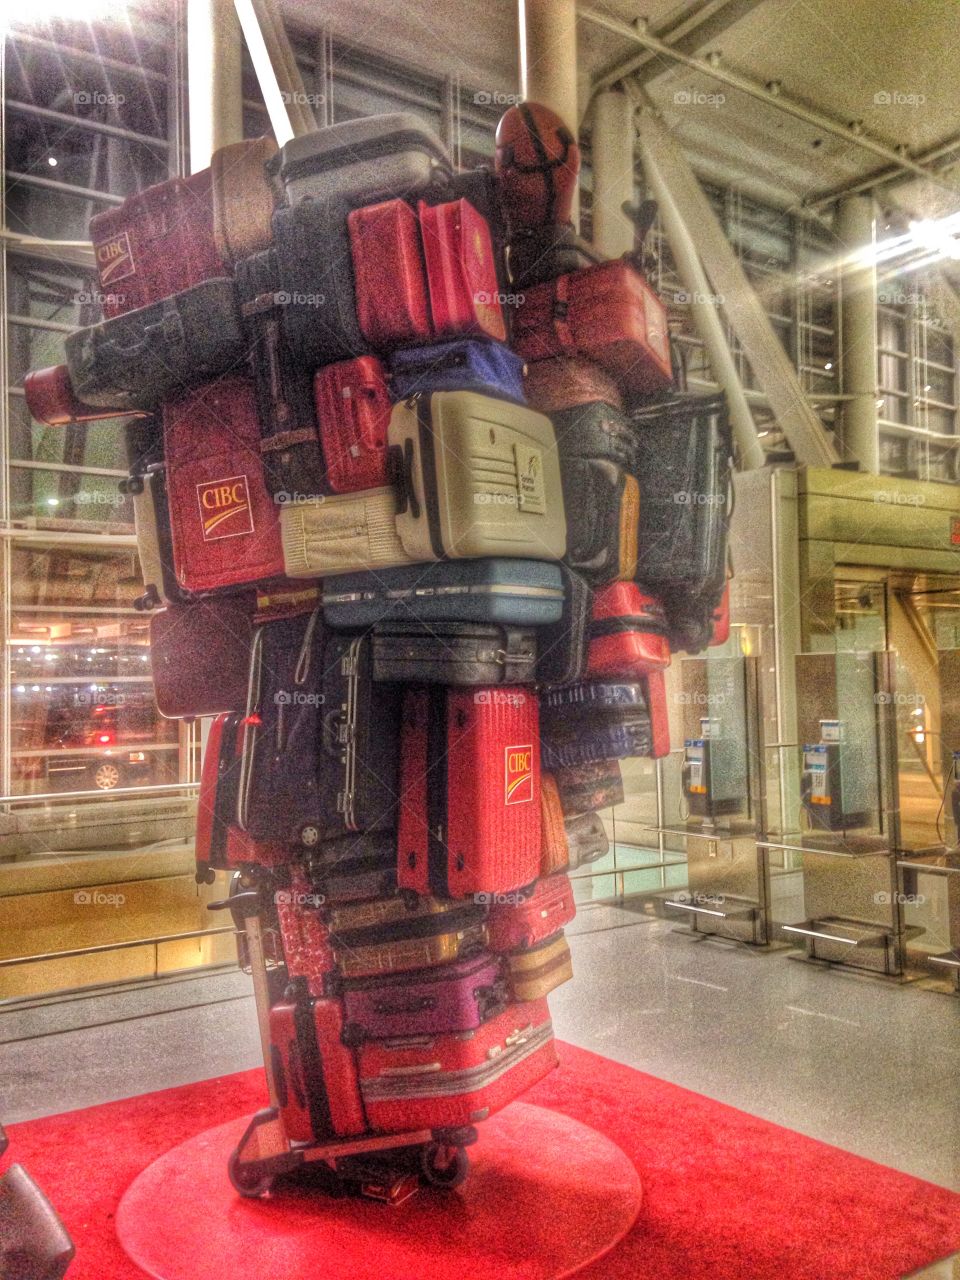 Too much luggage. Luggage installation at pearson airport